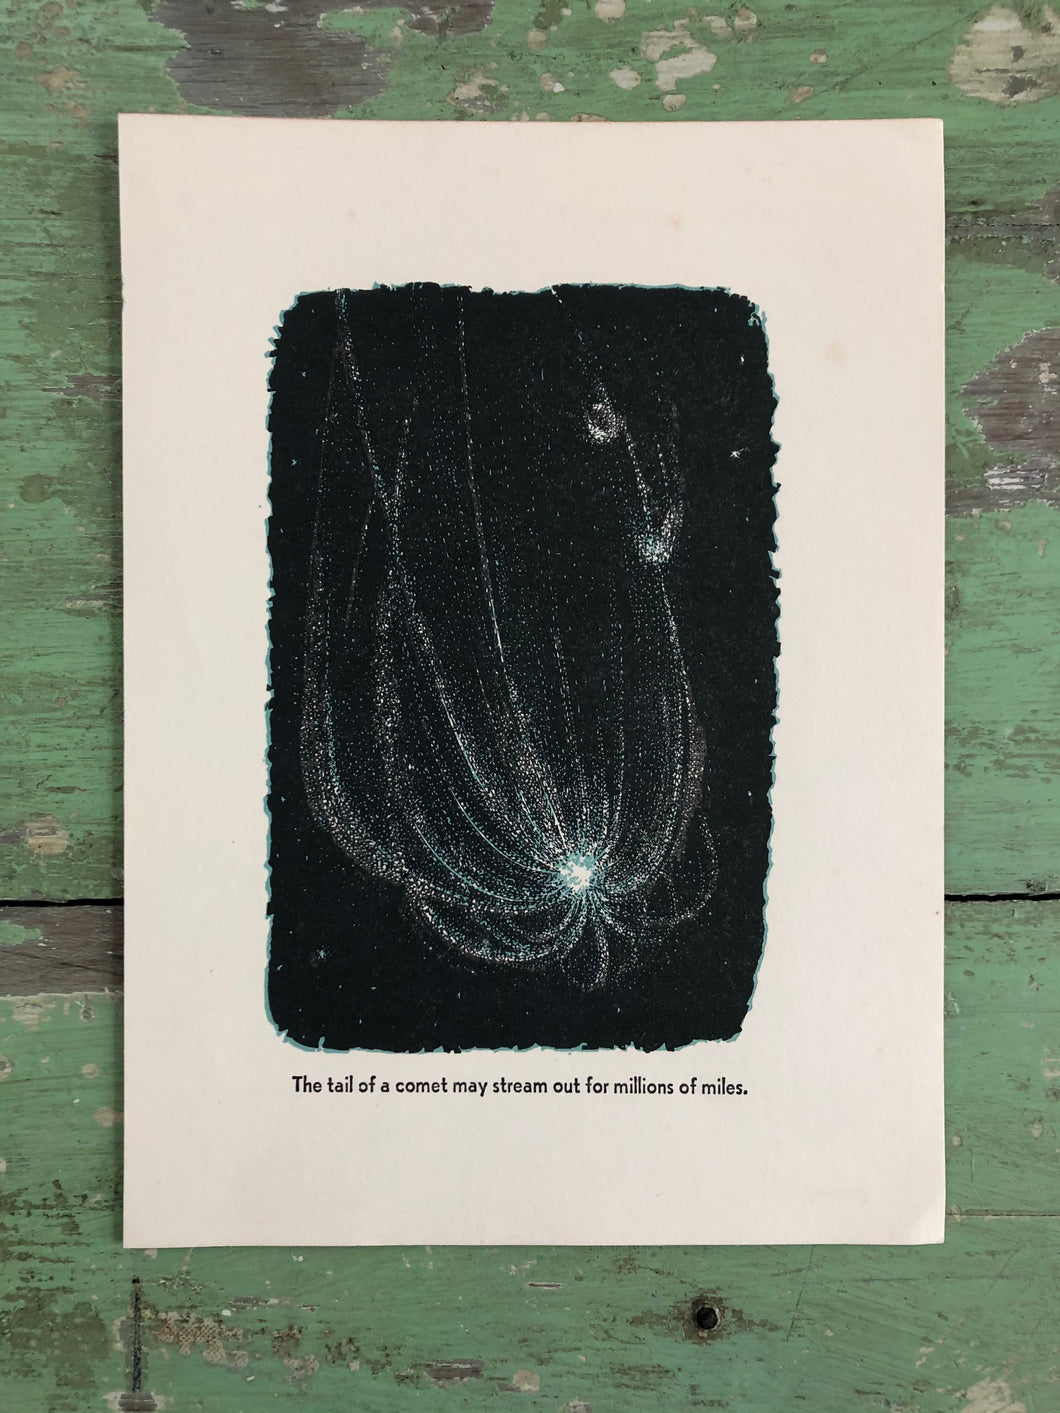 Print from “All About the Stars” illustrated by Martin Bileck